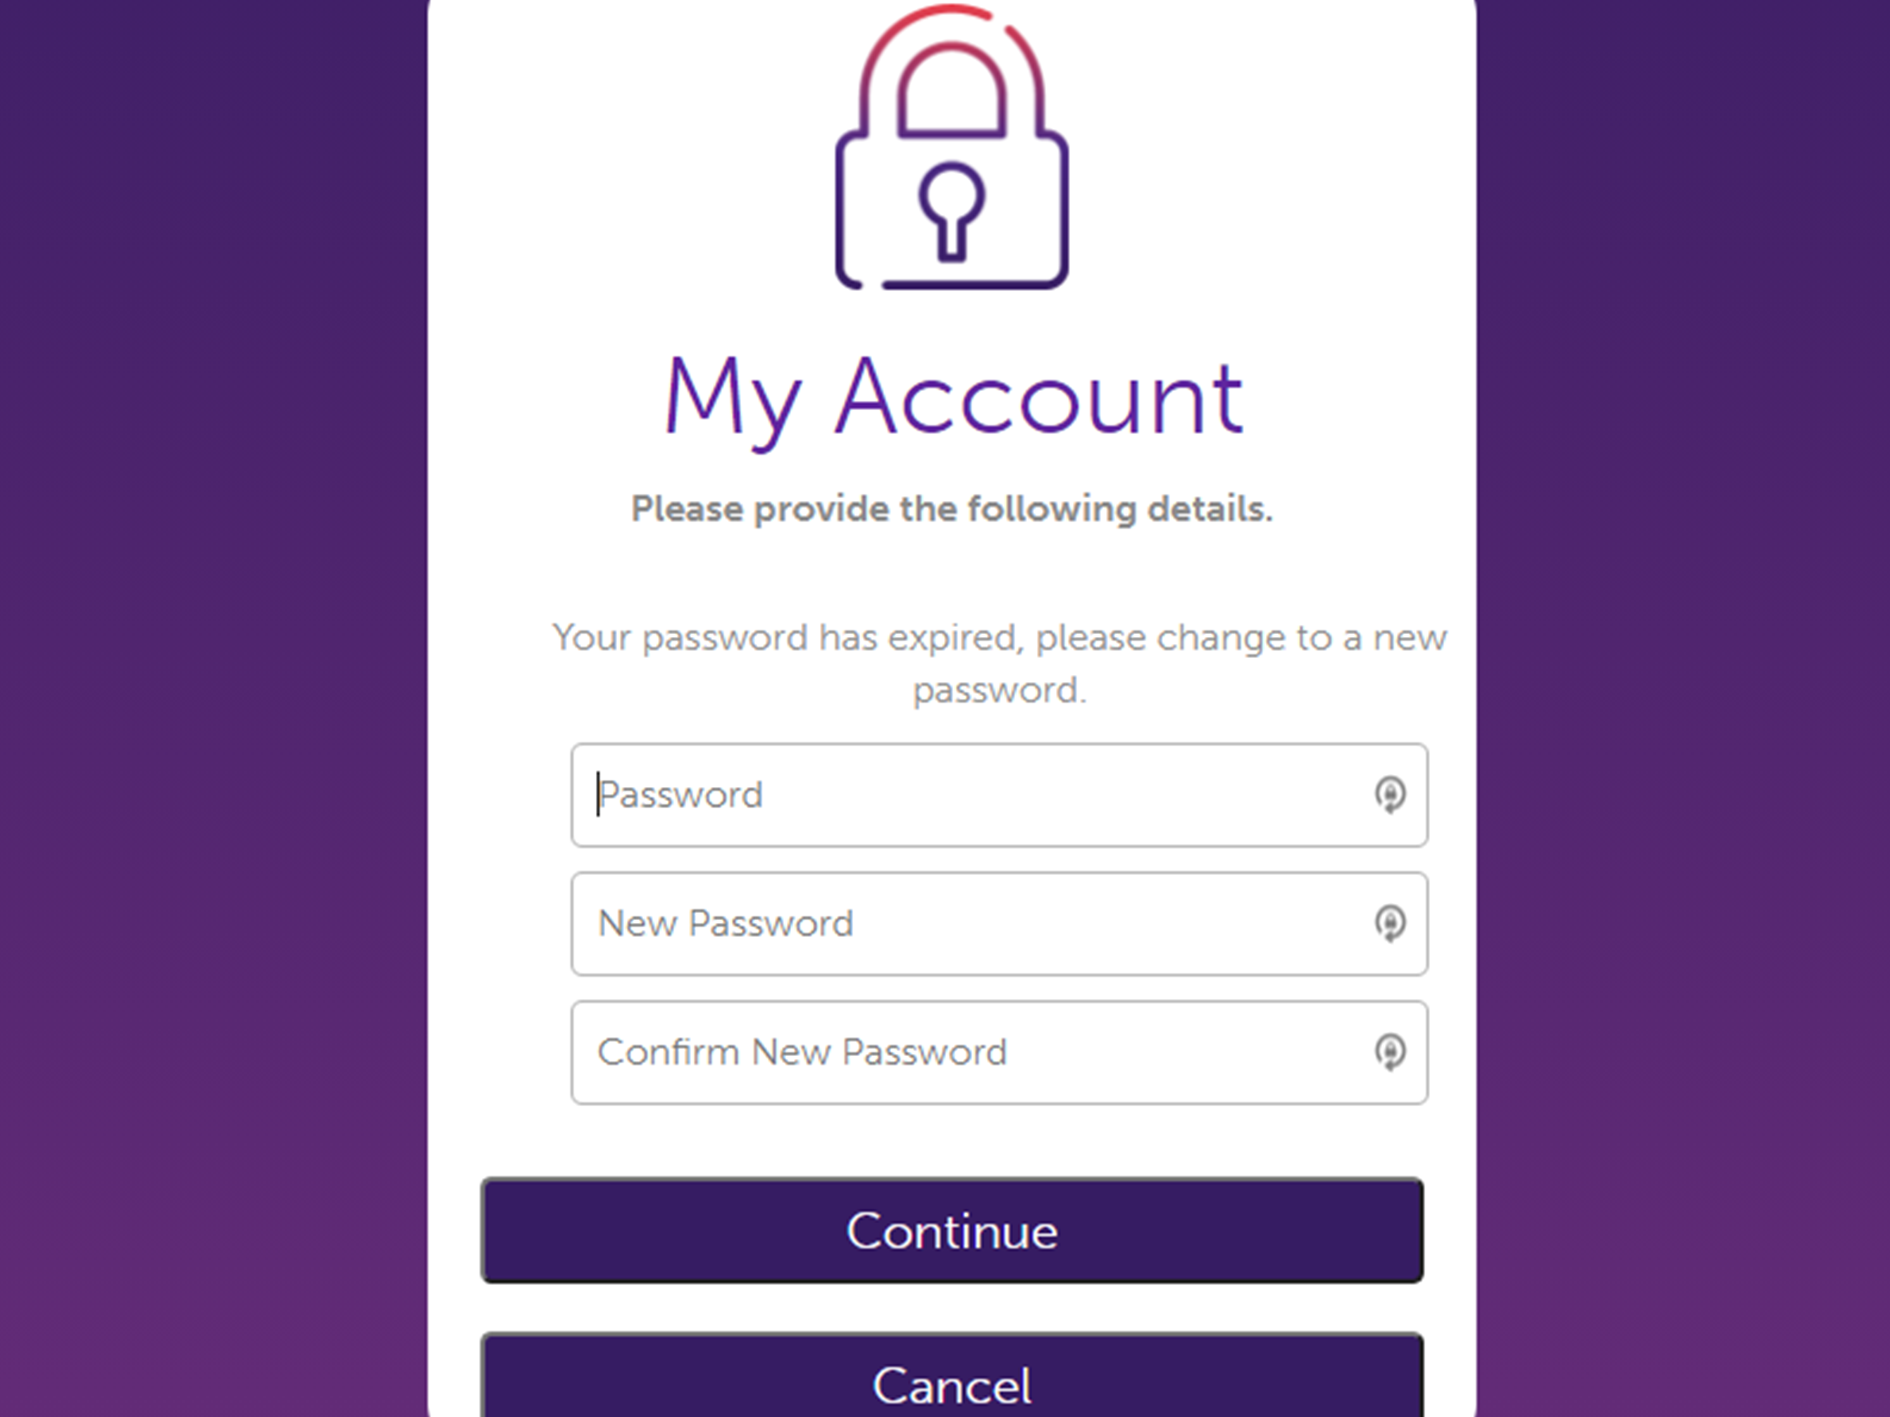 My account page prompting you to change your password